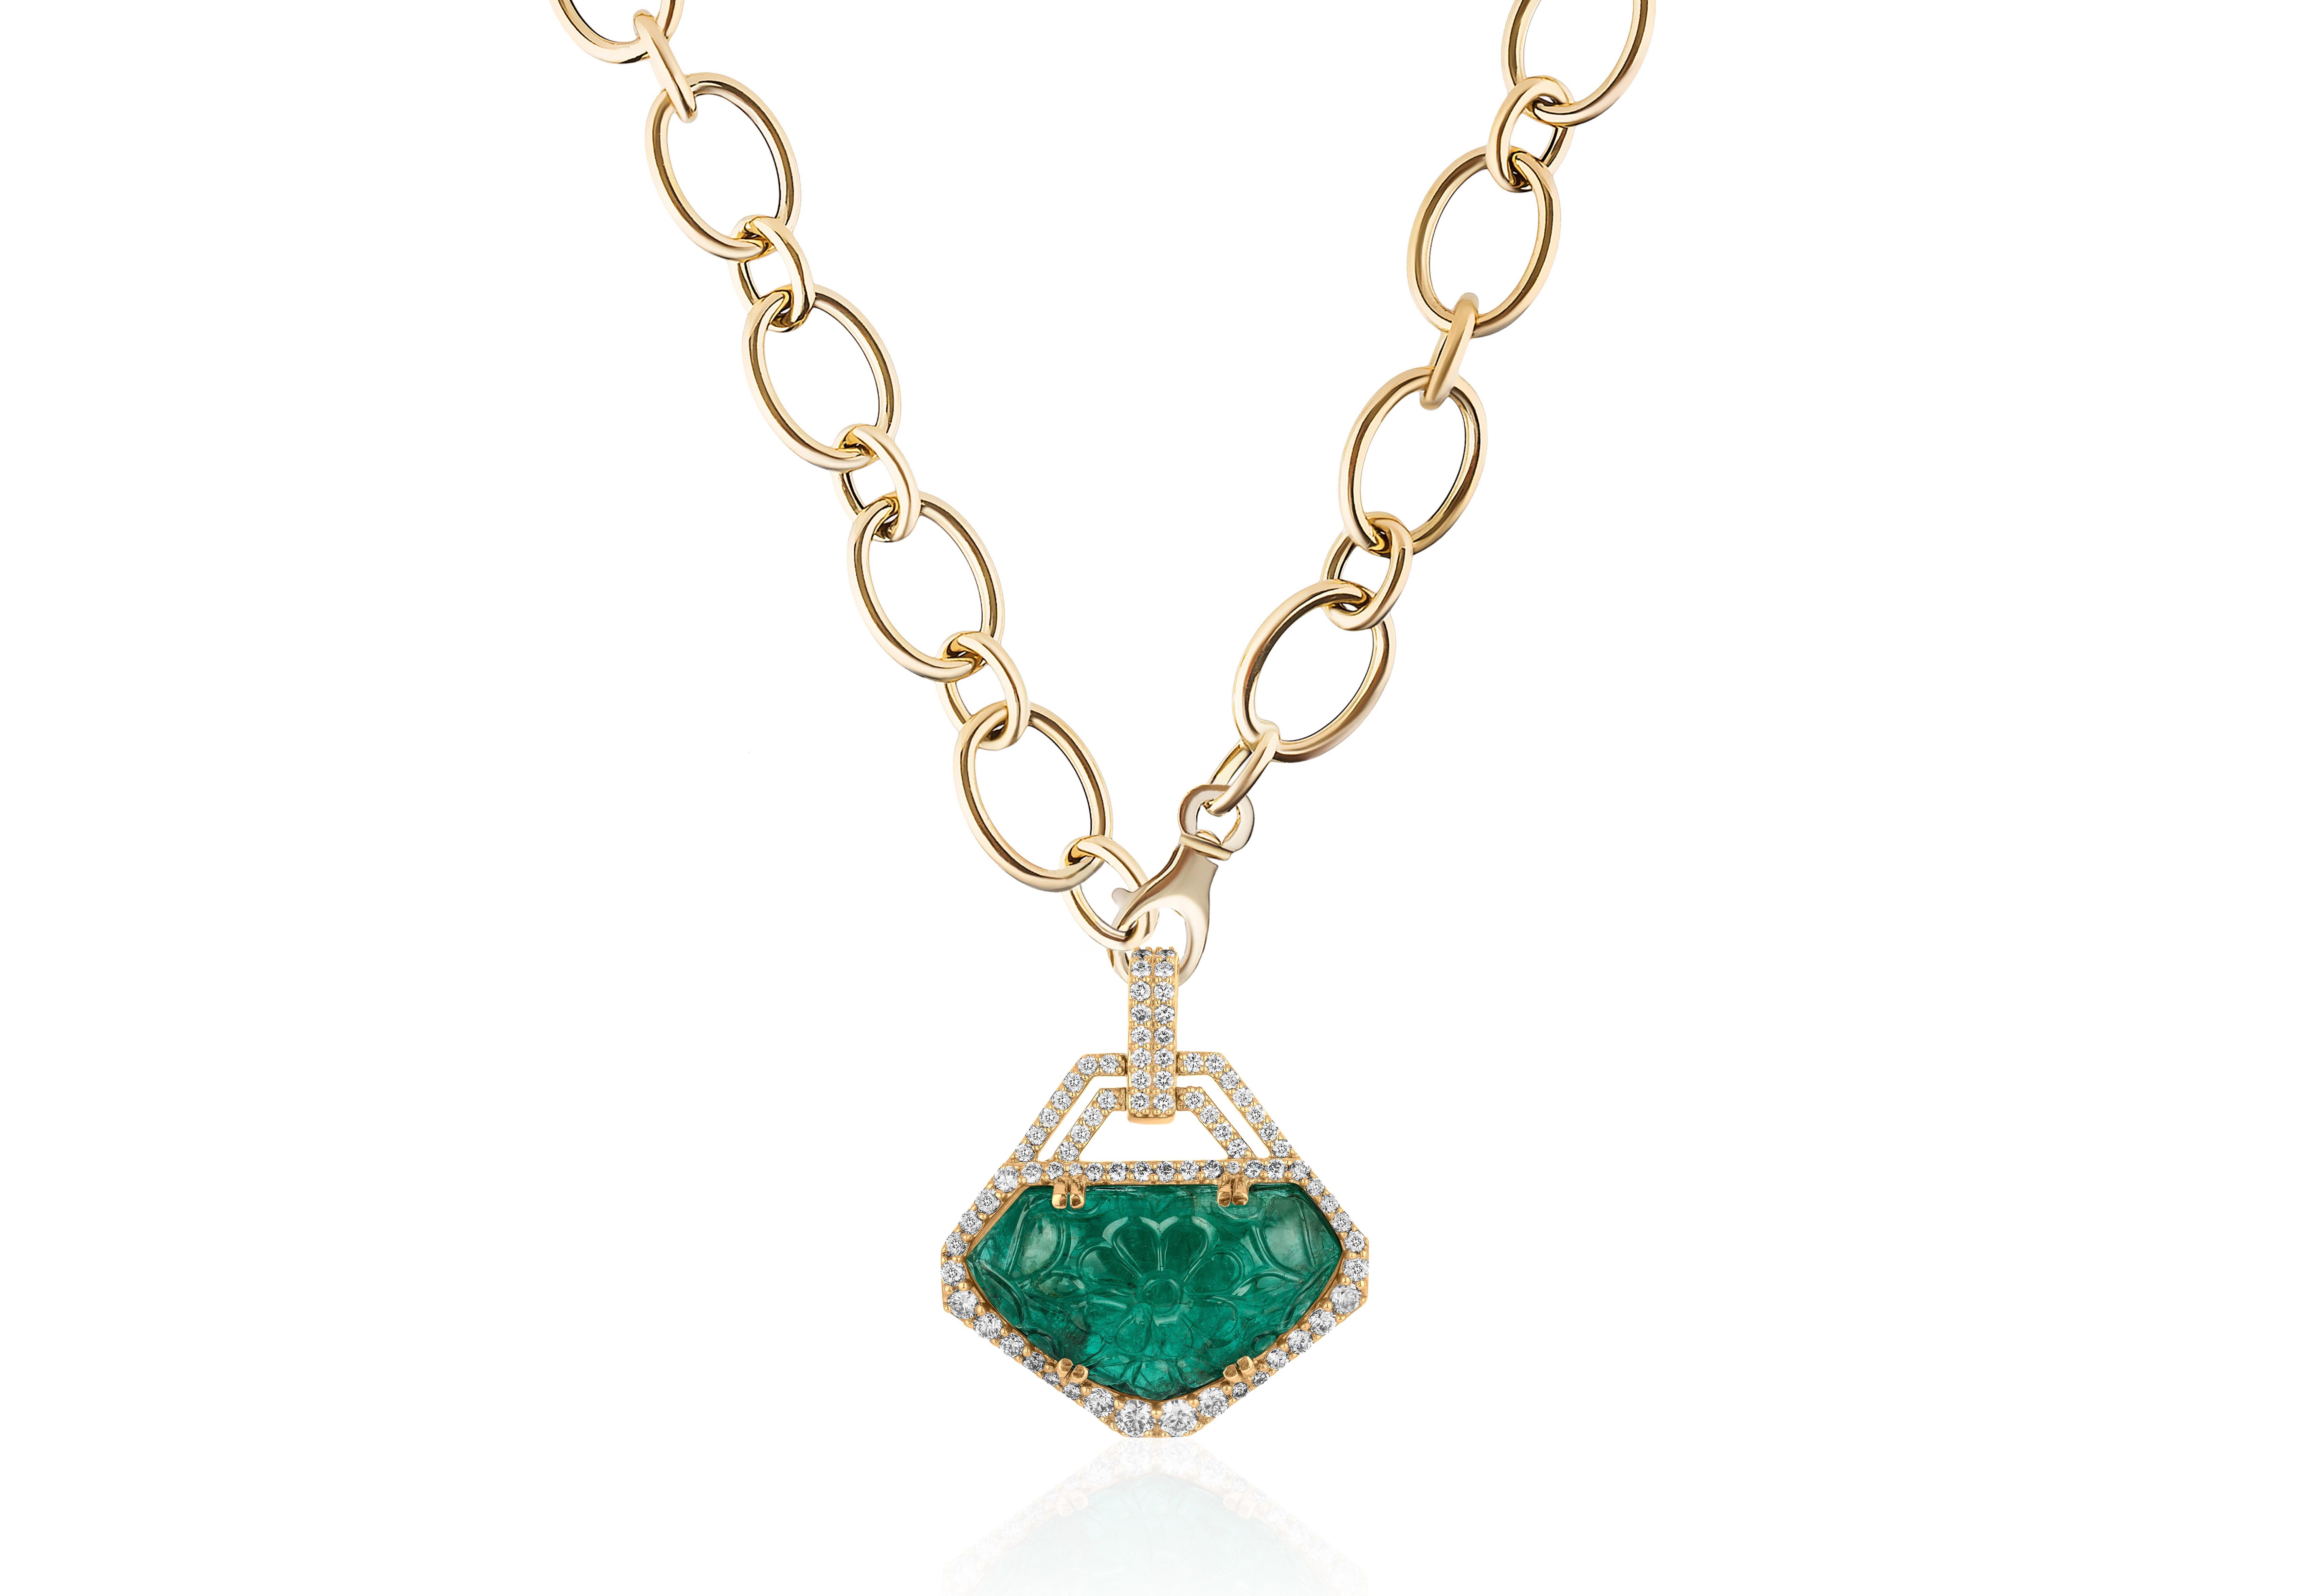 Carved Emerald & Diamond Pendant in 18K Yellow Gold, from 'G-One' Collection. Our G-One Collection undeniably carries the most special pieces of Goshwara. The sought-after, one-of-a-kind pieces speak to each unique personality of the person wearing